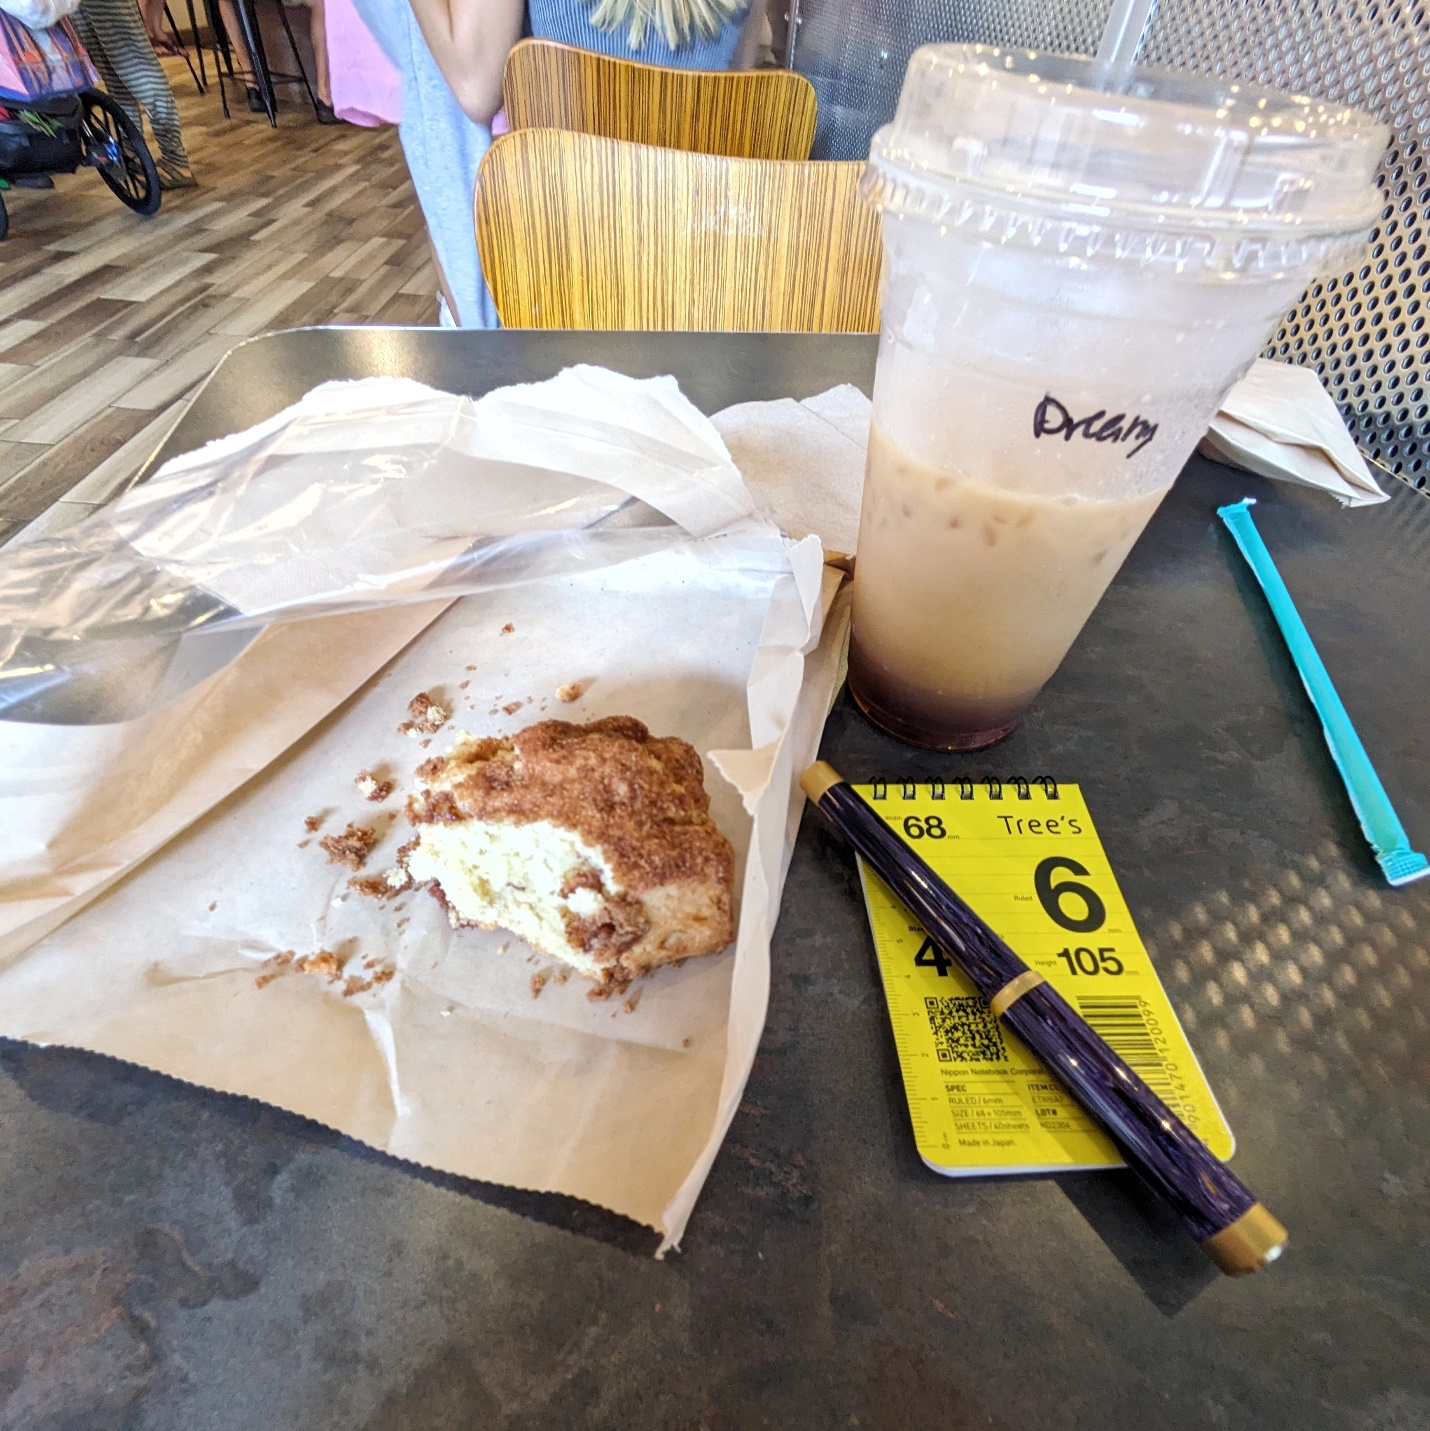 After the painstaking work of selecting all those items it was necessary to get coffee and a scone at nearby Sweetwaters Coffee & Tea. 